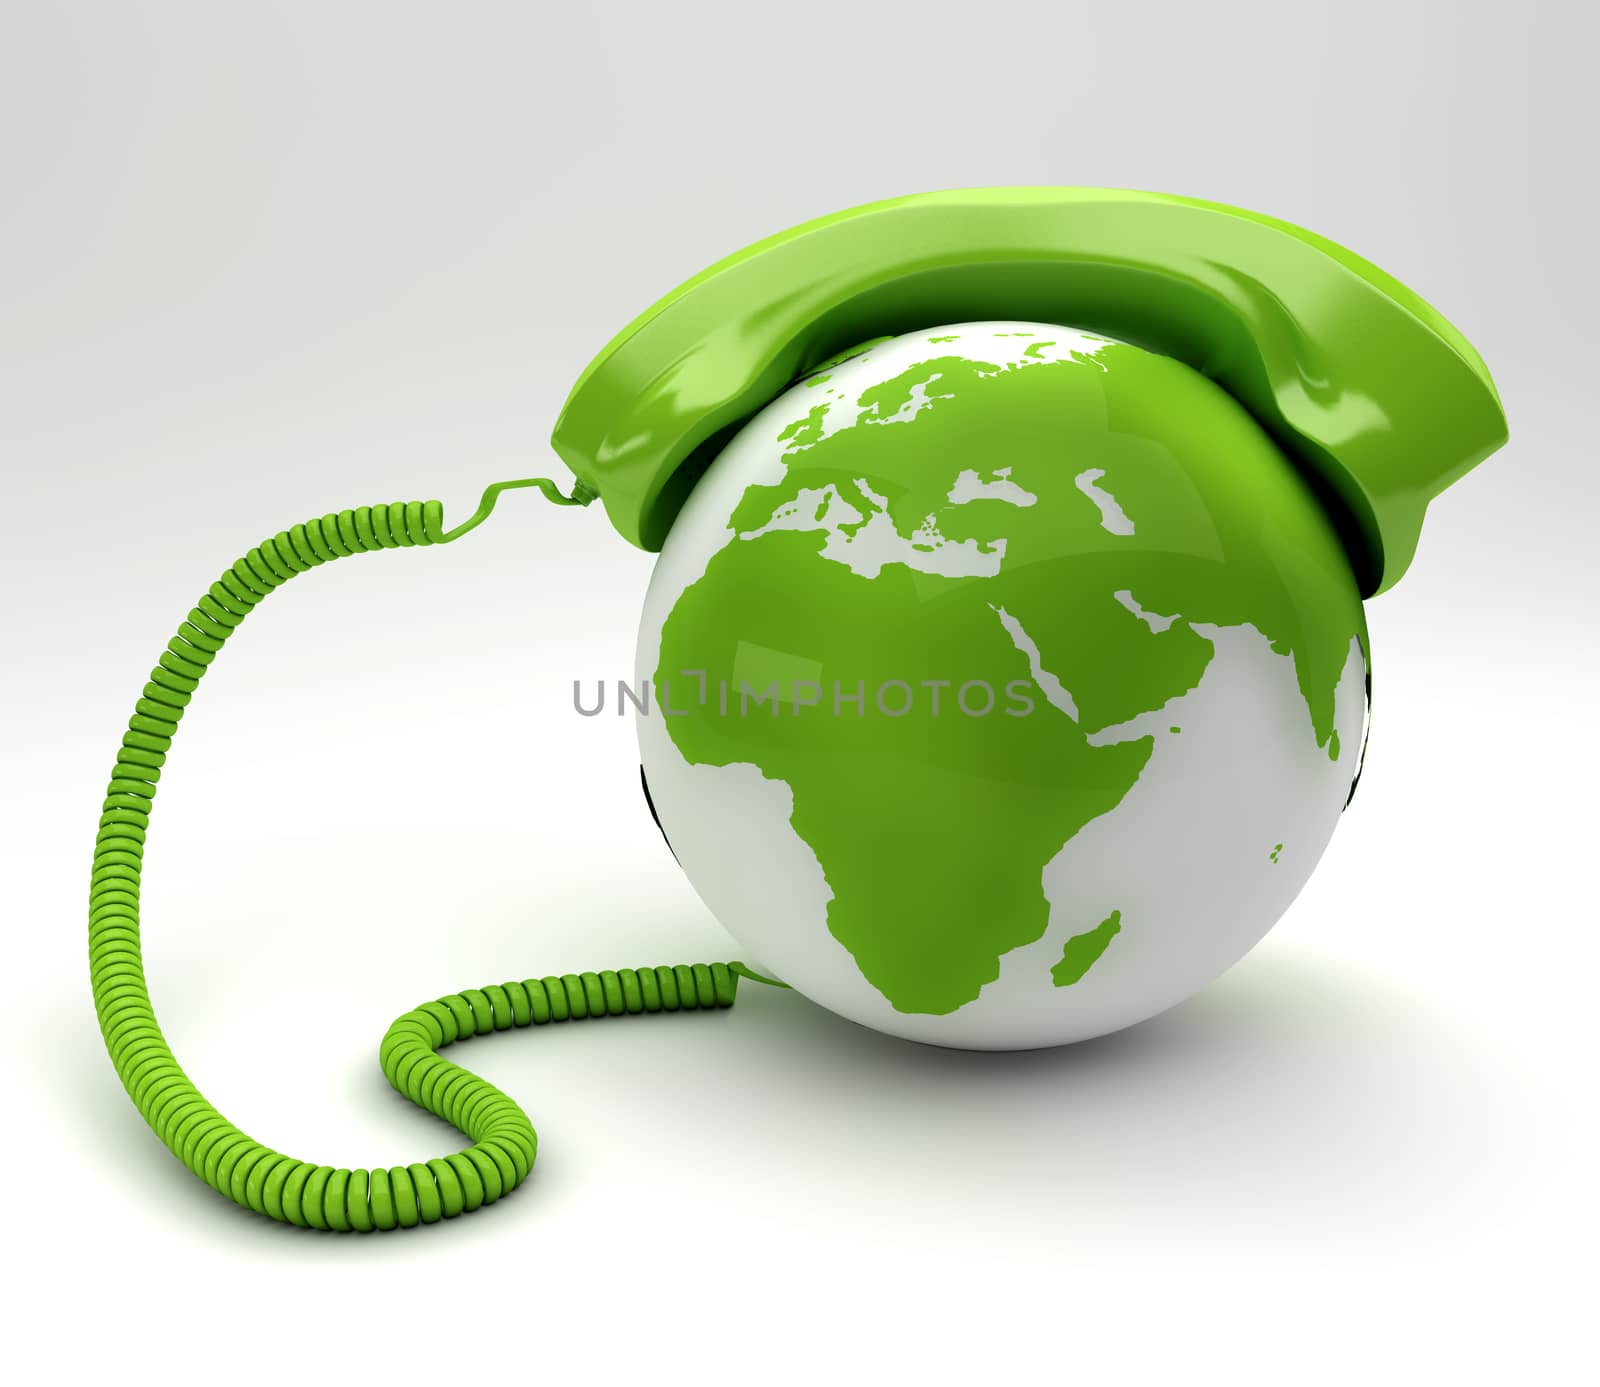 A global teleommunications concept - green phoneand planet